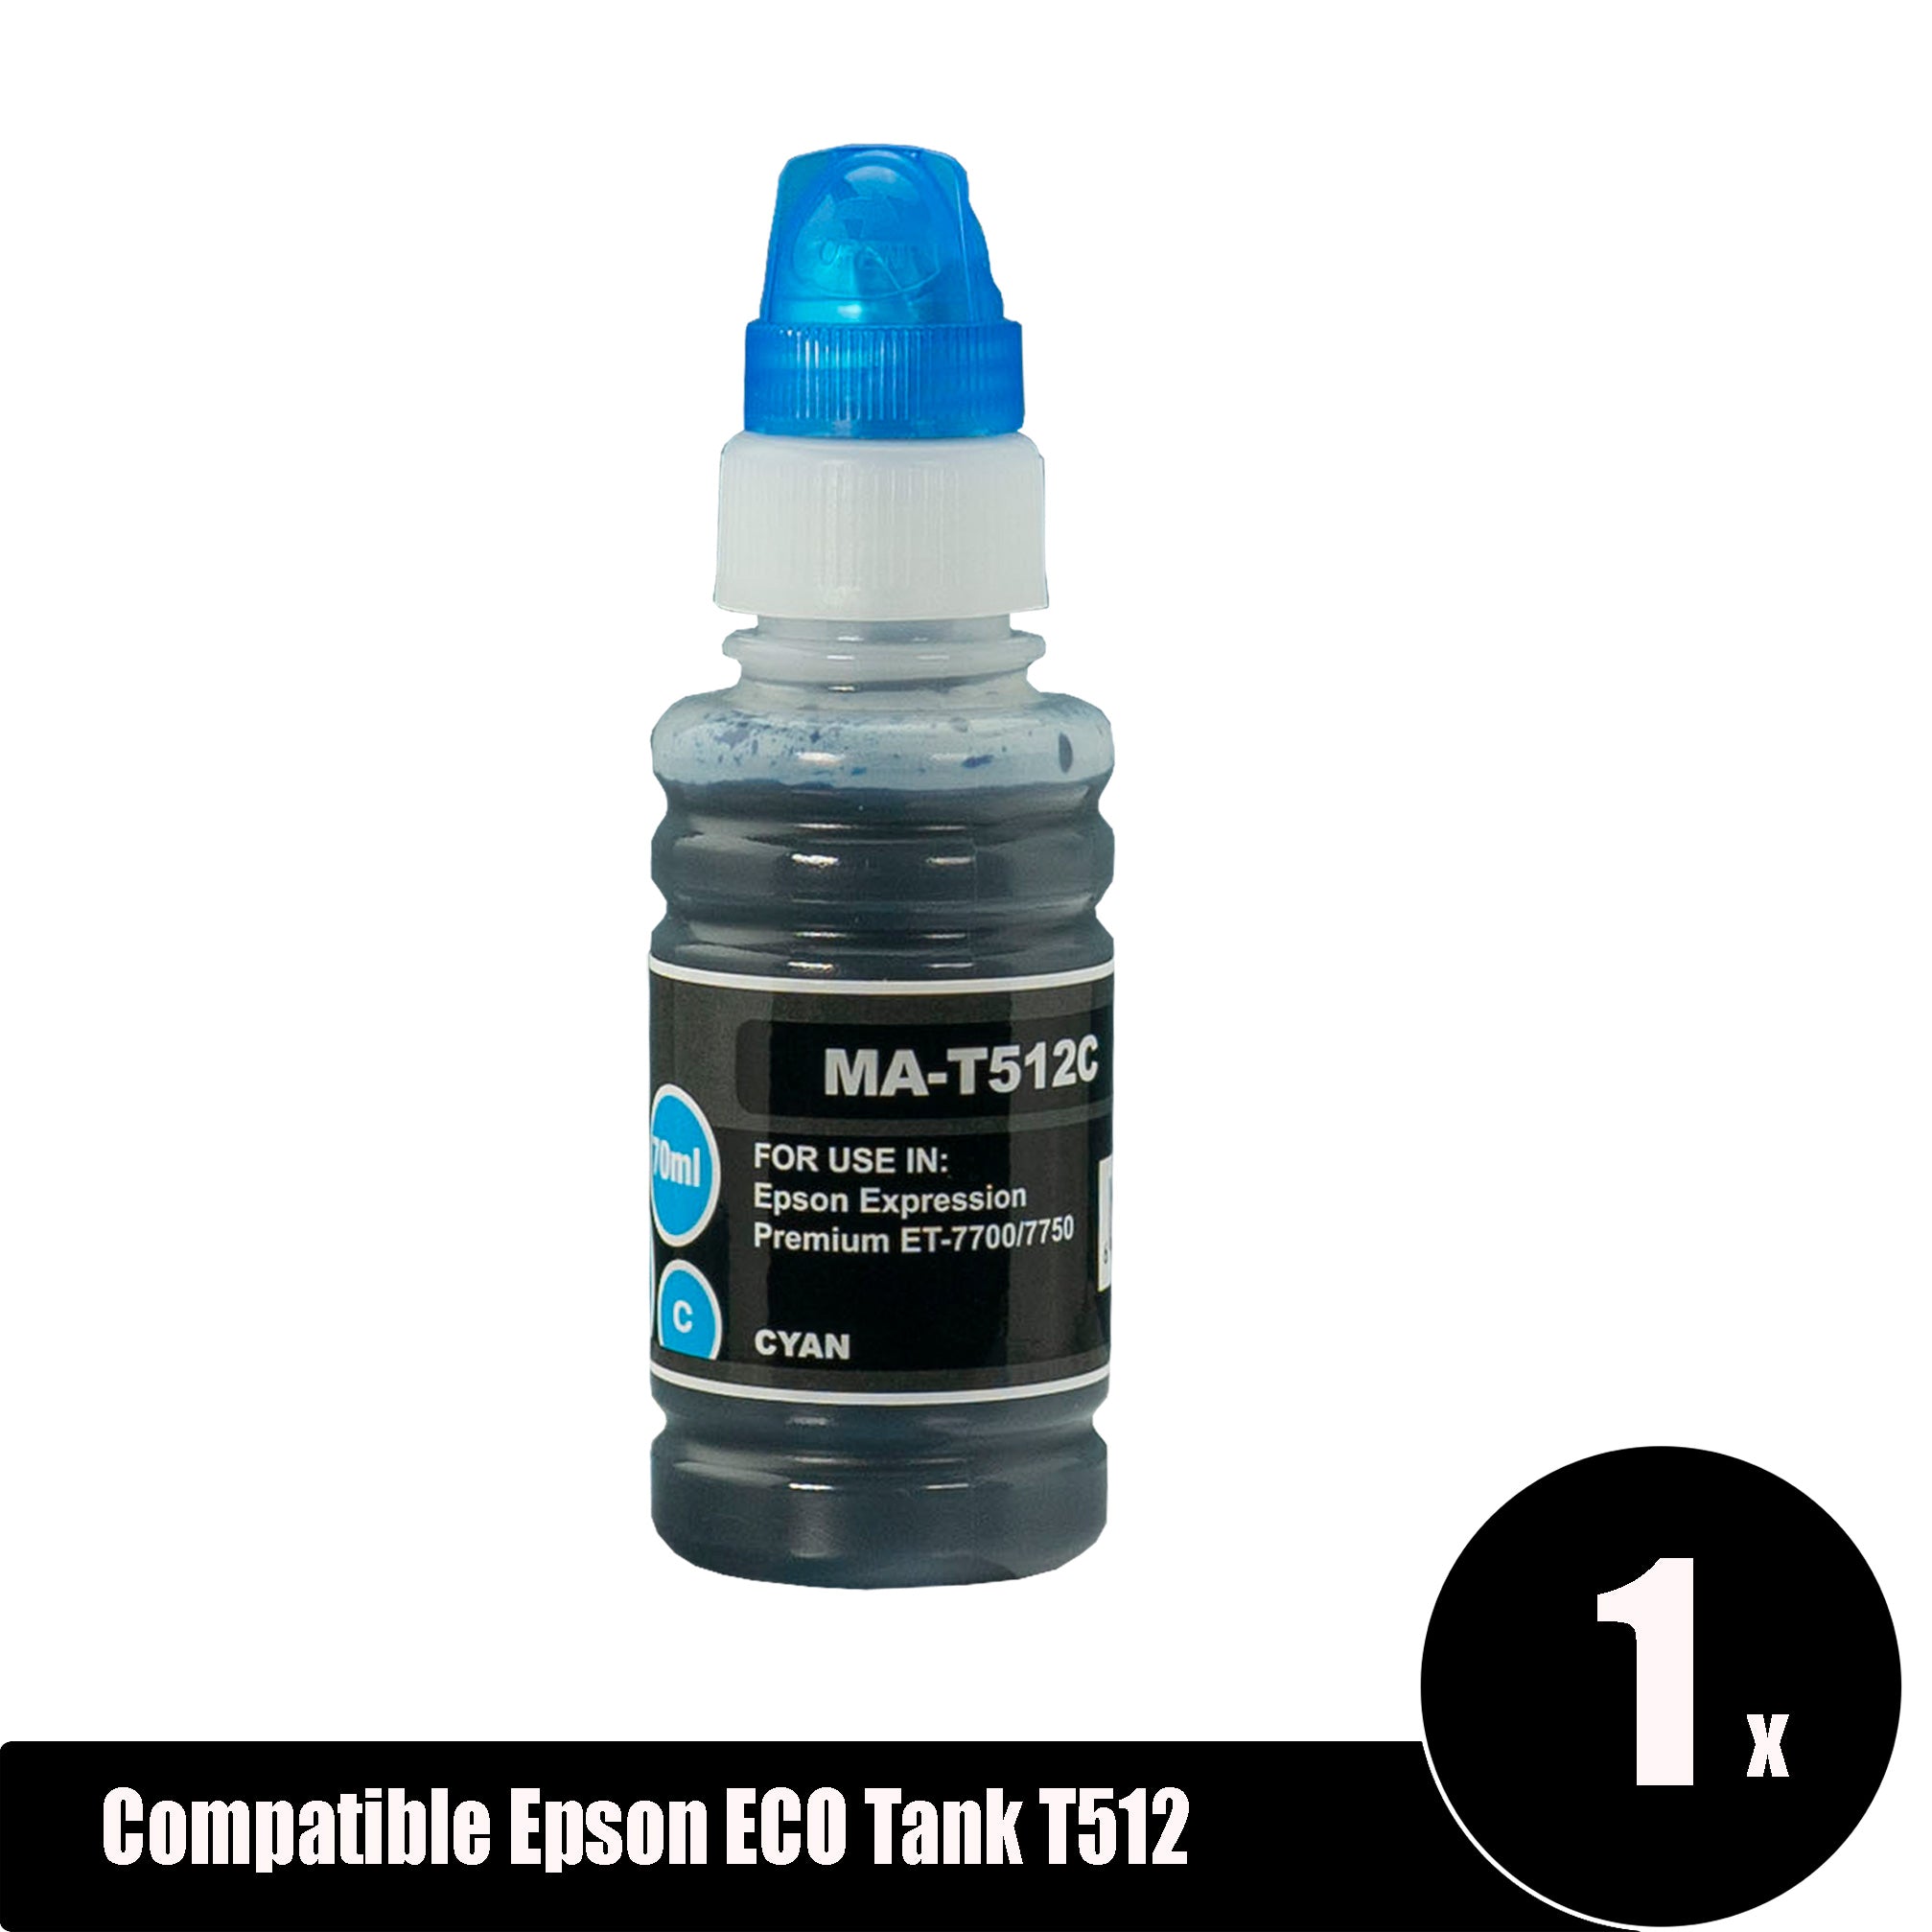 Compatible Epson ECO Tank T512 Cyan Ink